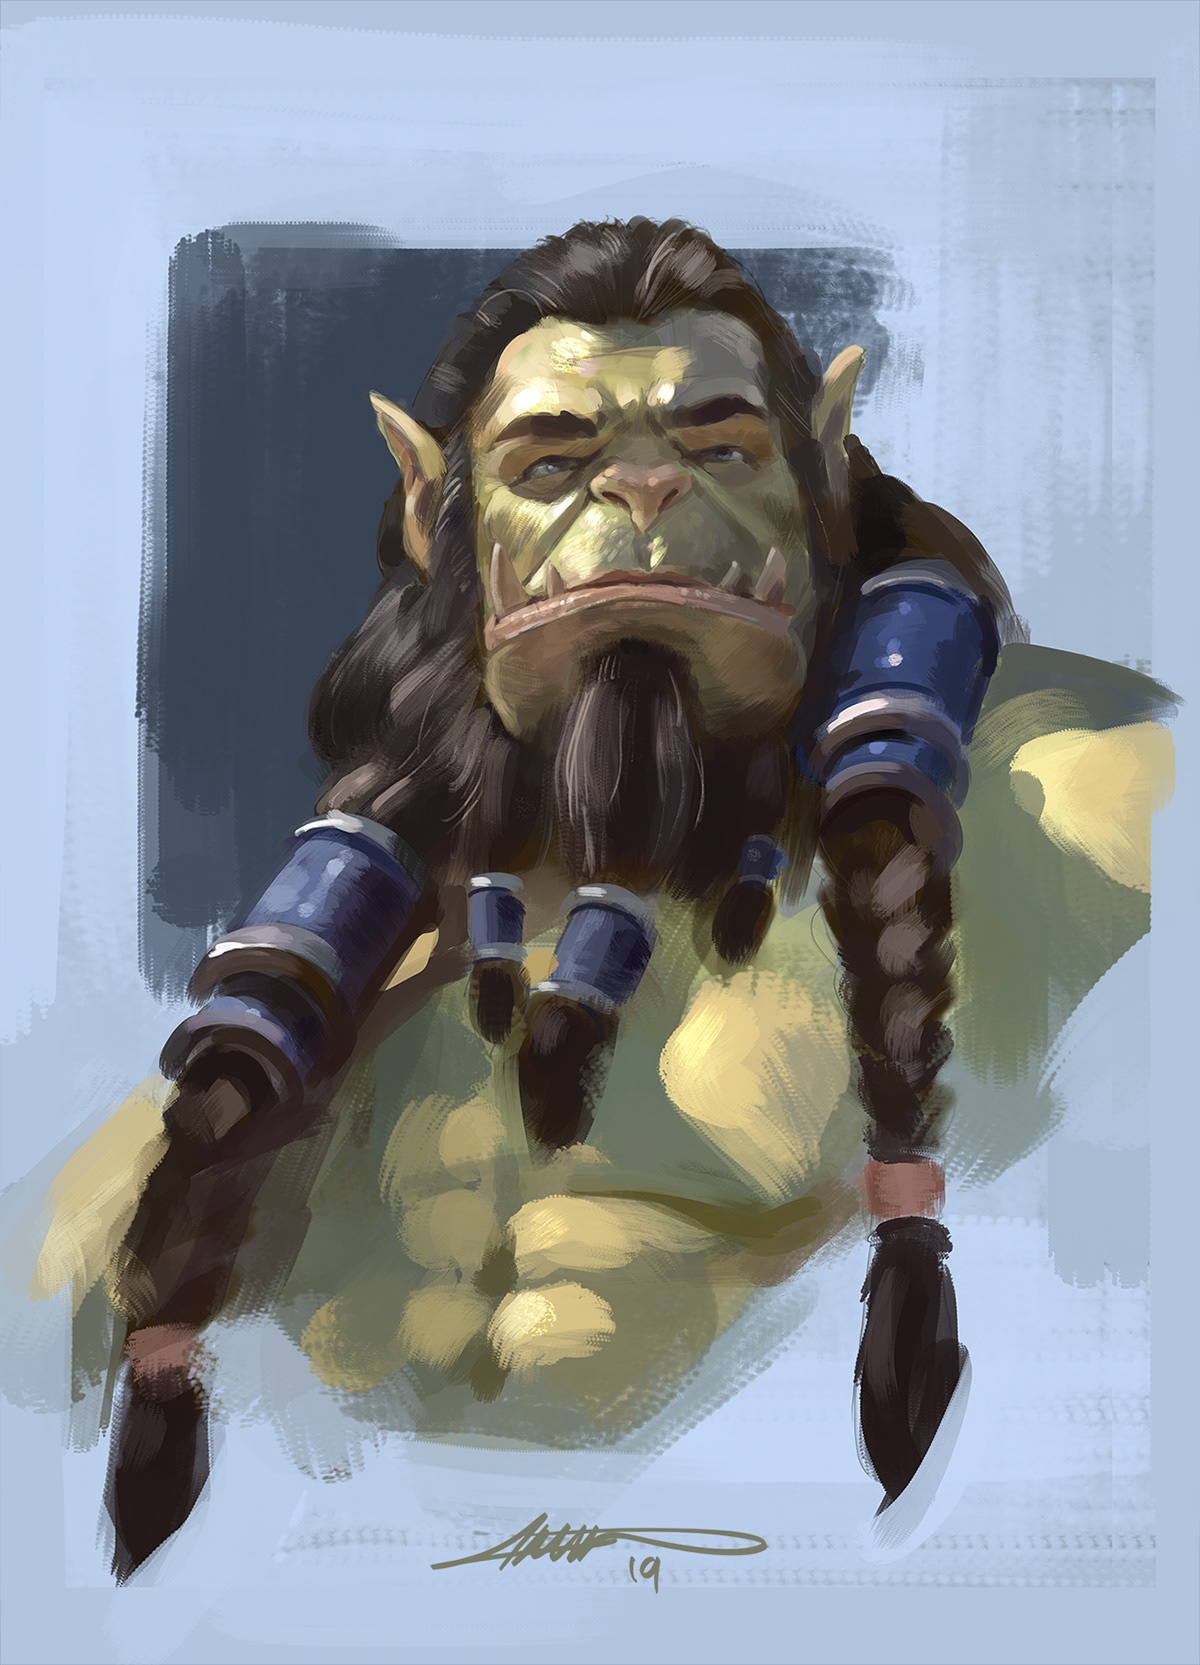 warcraft World of warcraft Thrall orc game fanart Game Art Blizzard Character fantasy